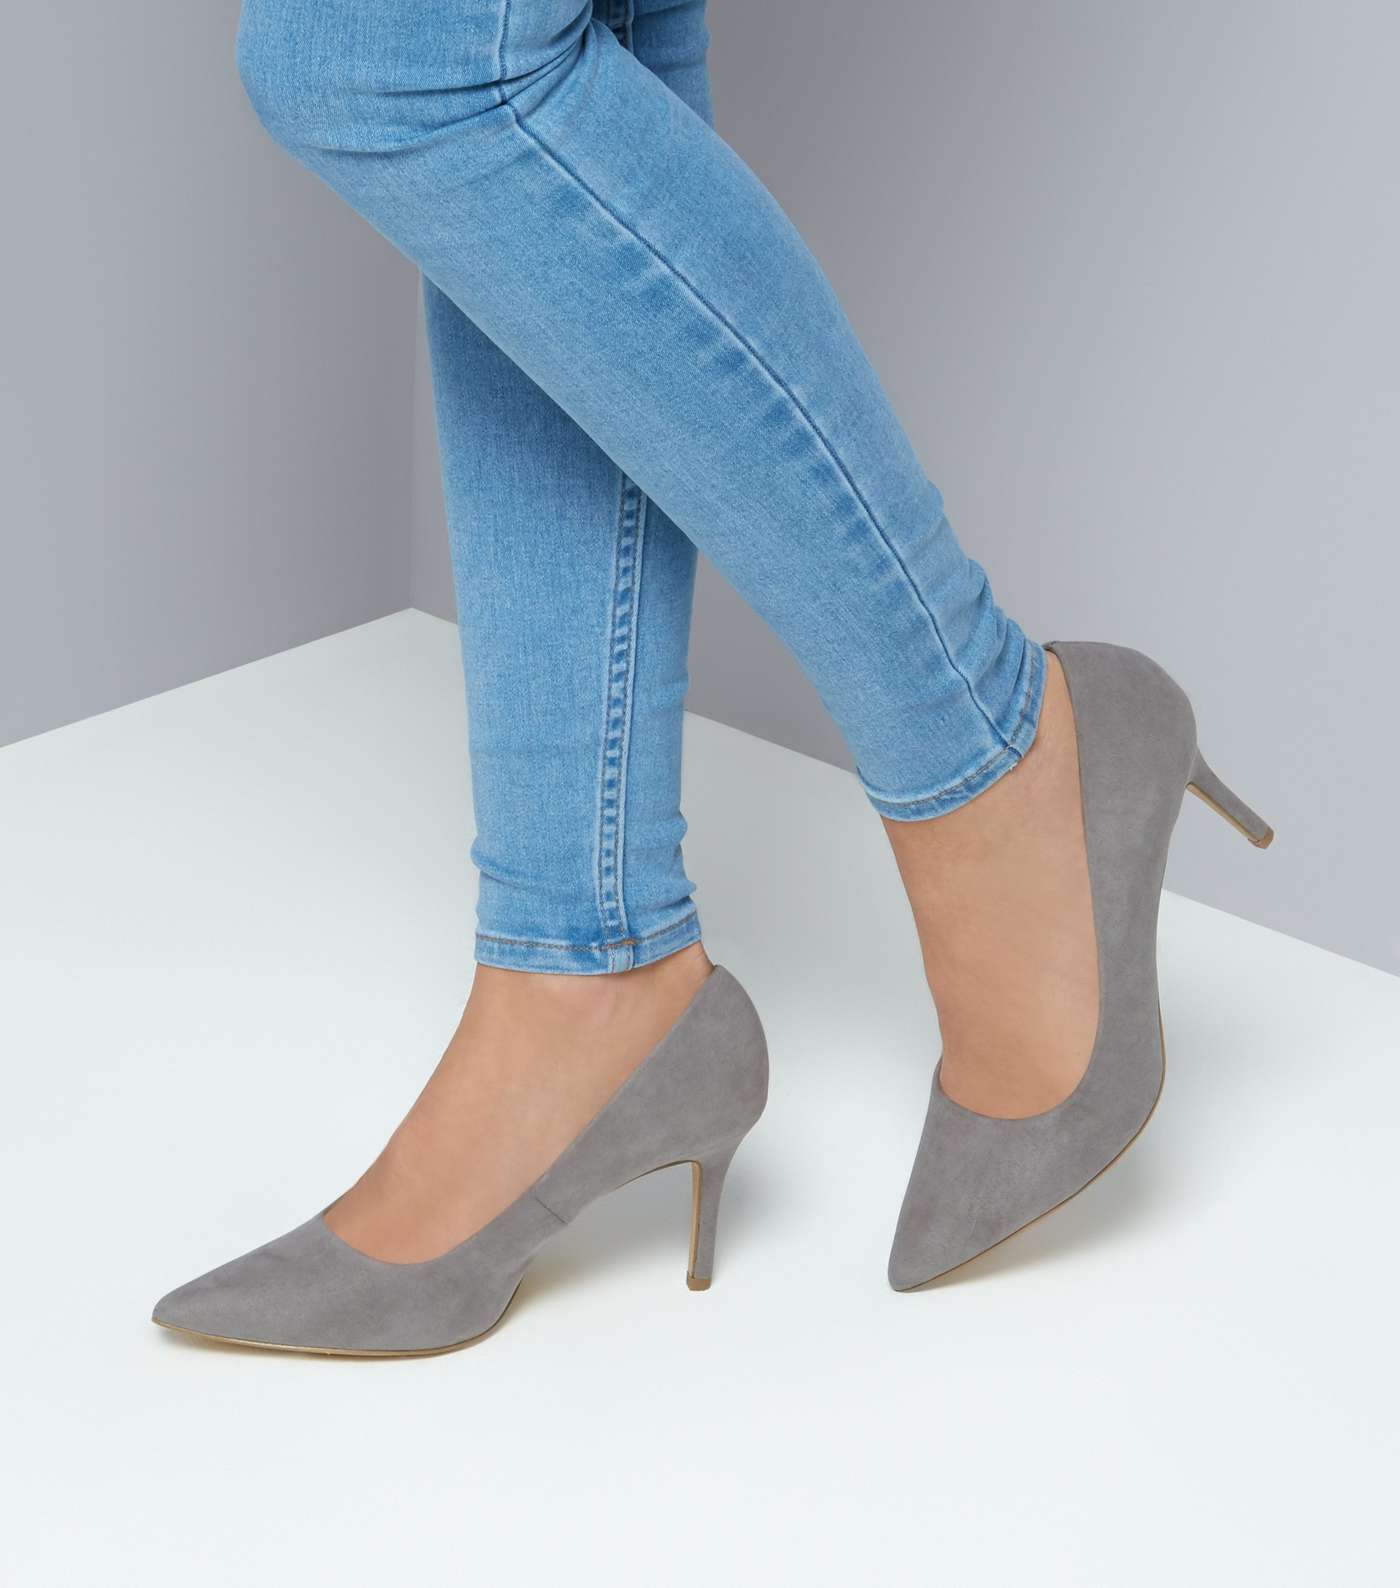 Grey Suedette Mid Heel Pointed Court Shoes Image 3